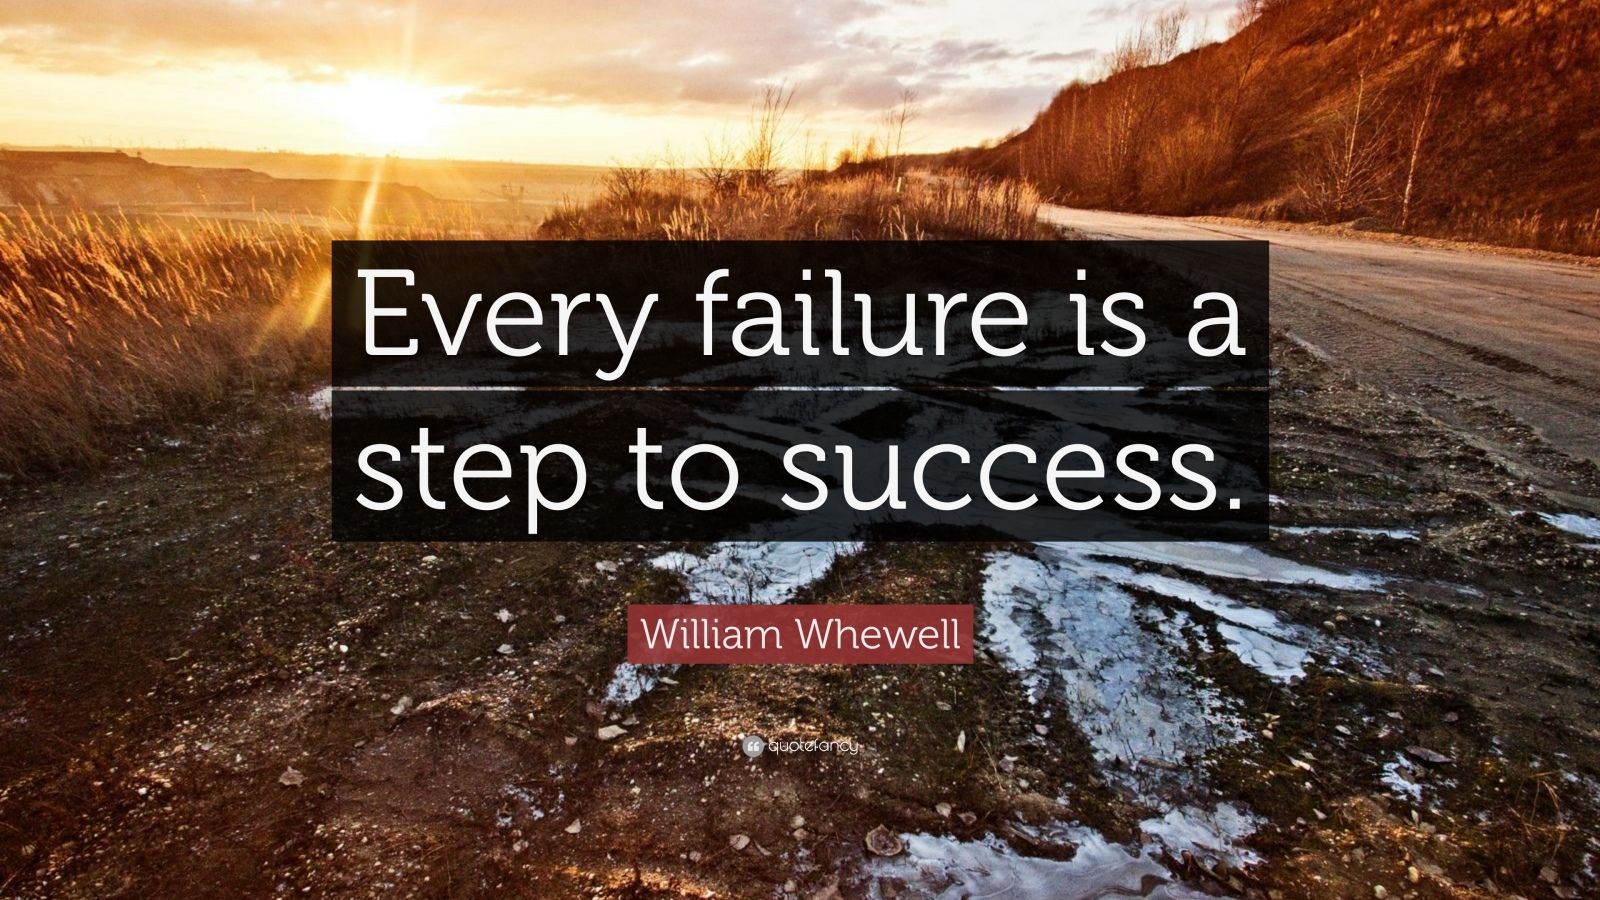 William Whewell Quote “Every failure is a step to success.” (12